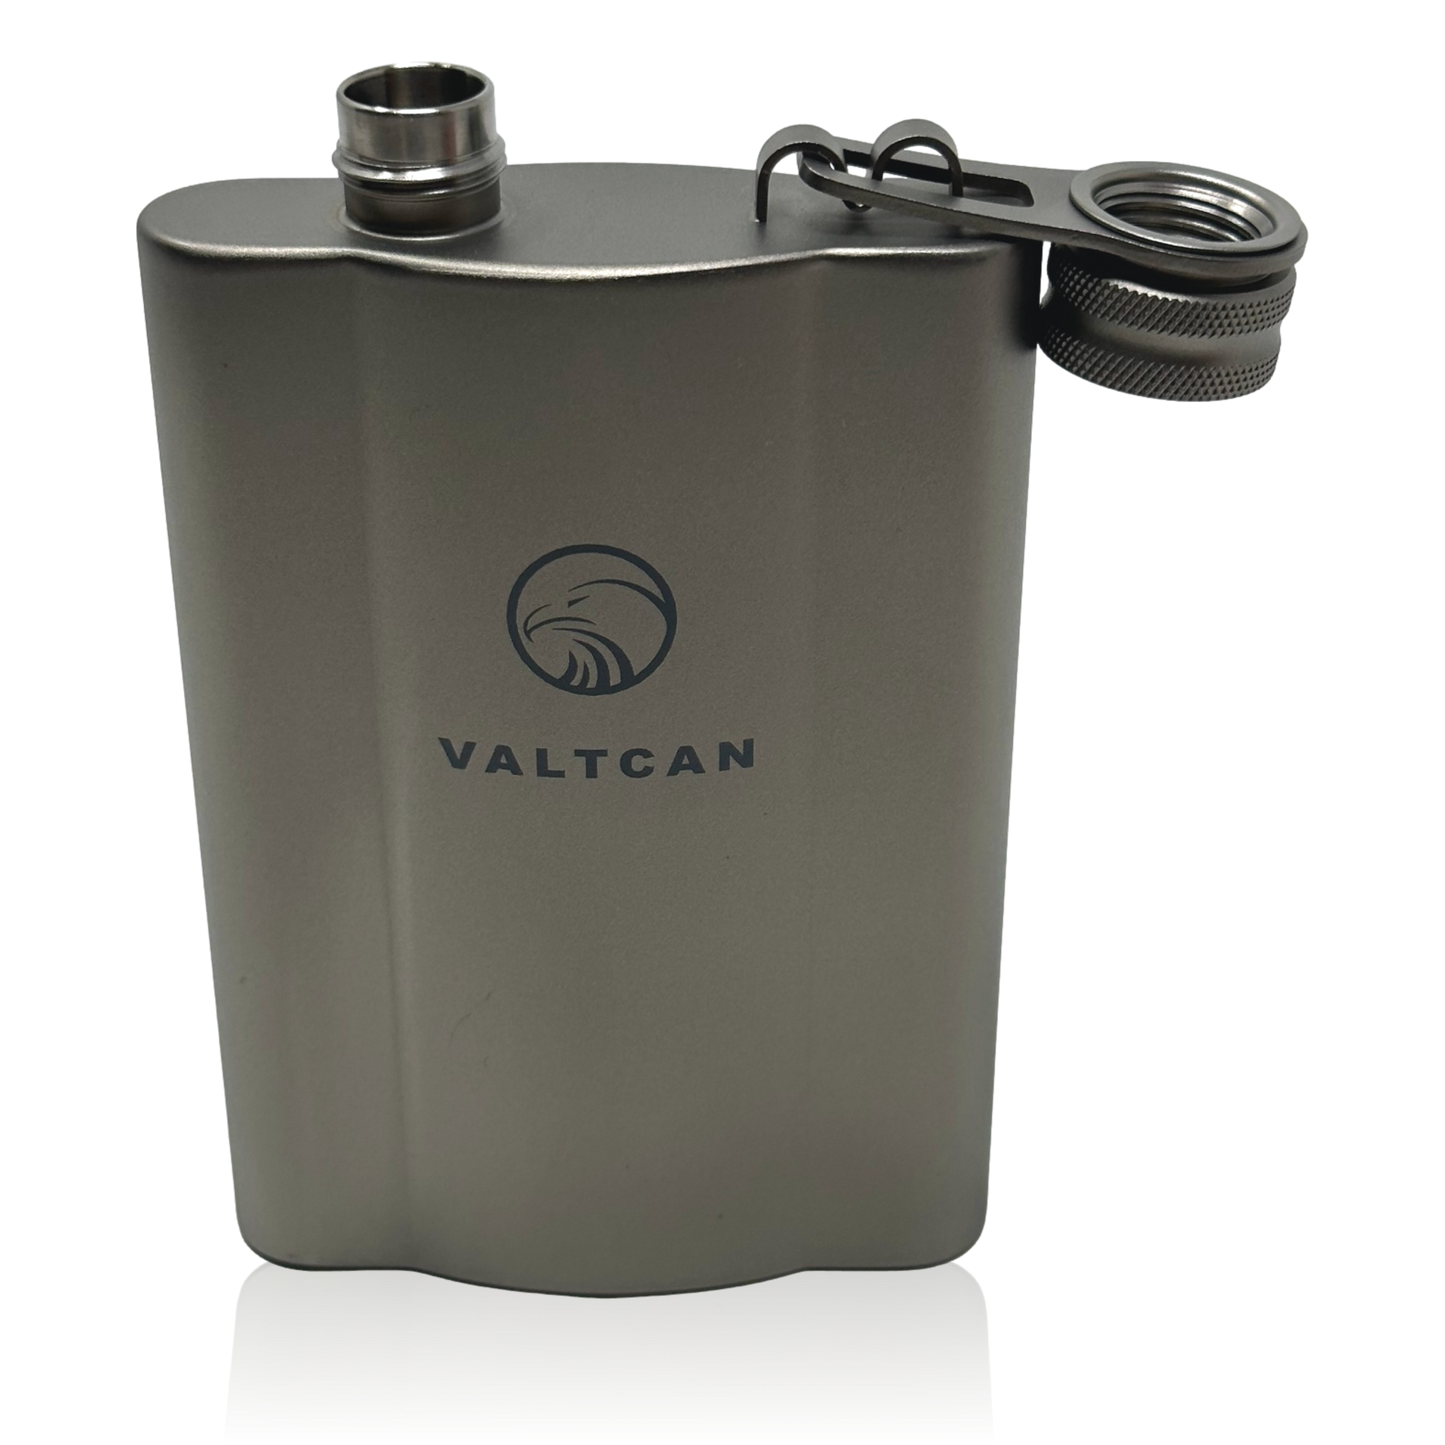 Valtcan Titanium Flask "Double Up" Canteen Military Design Fits into Canteen Front Pouch with Ti Funnel Ultralight